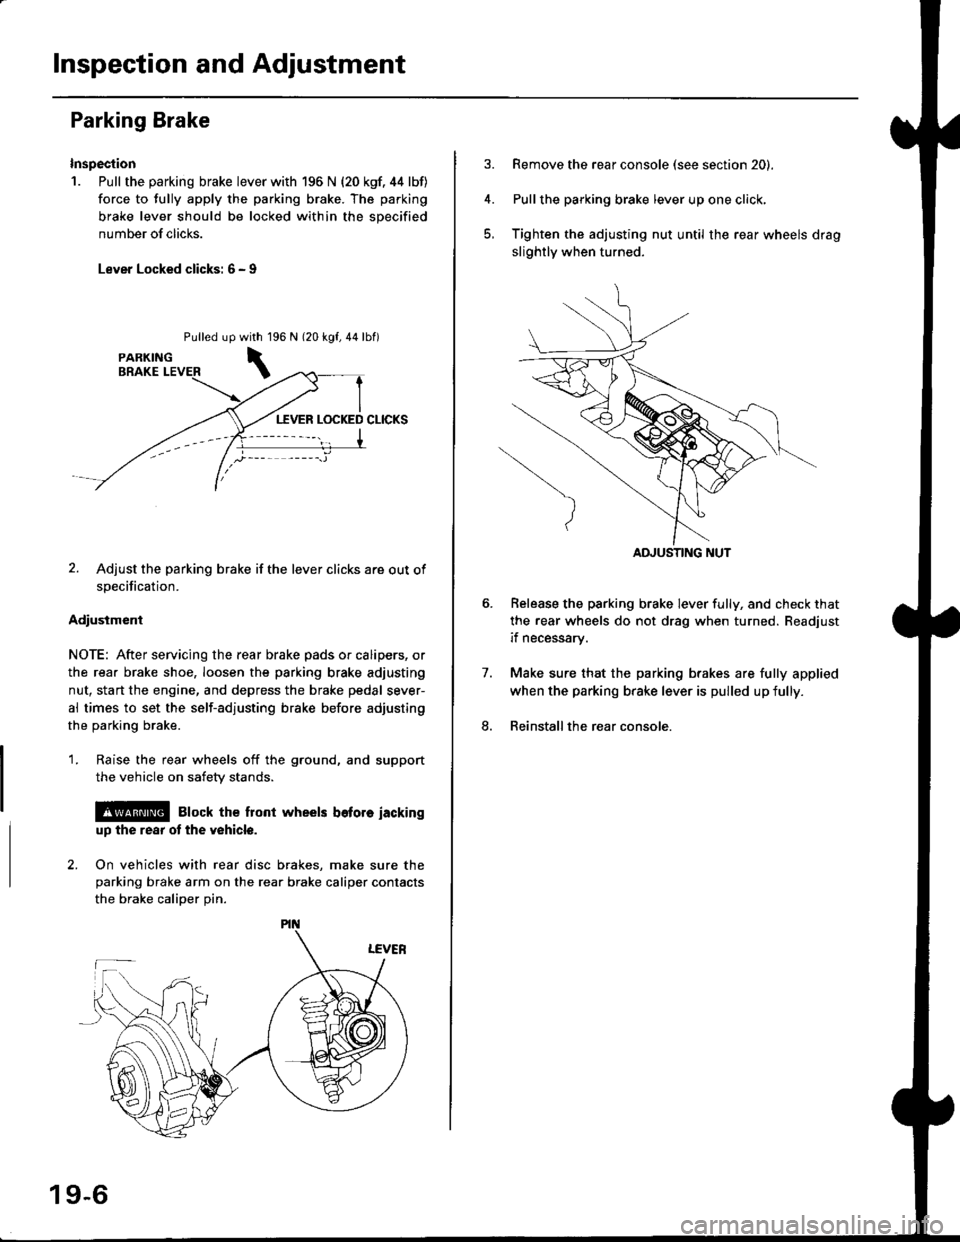 HONDA CIVIC 1996 6.G Owners Guide Inspection and Adjustment
Parking Brake
Inspection
1. Pull the parking brake lever with 196 N {20 kgf. 44 lbf)
force to fully apply the parking brake. The parking
brake lever should be locked within t